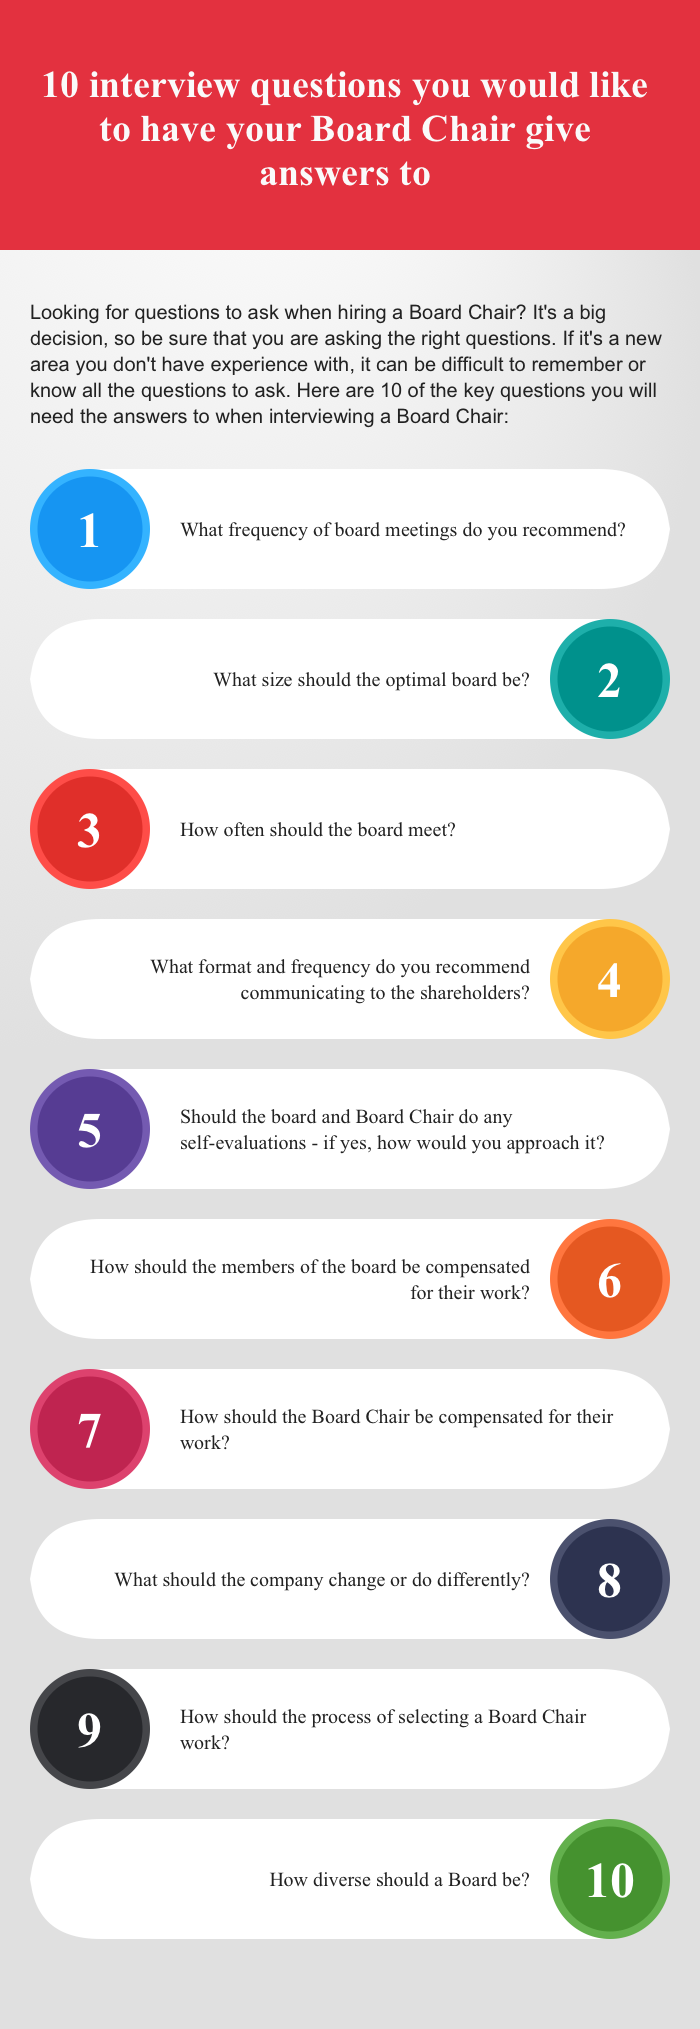 10 interview questions you would like to have your Board Chair give answers to